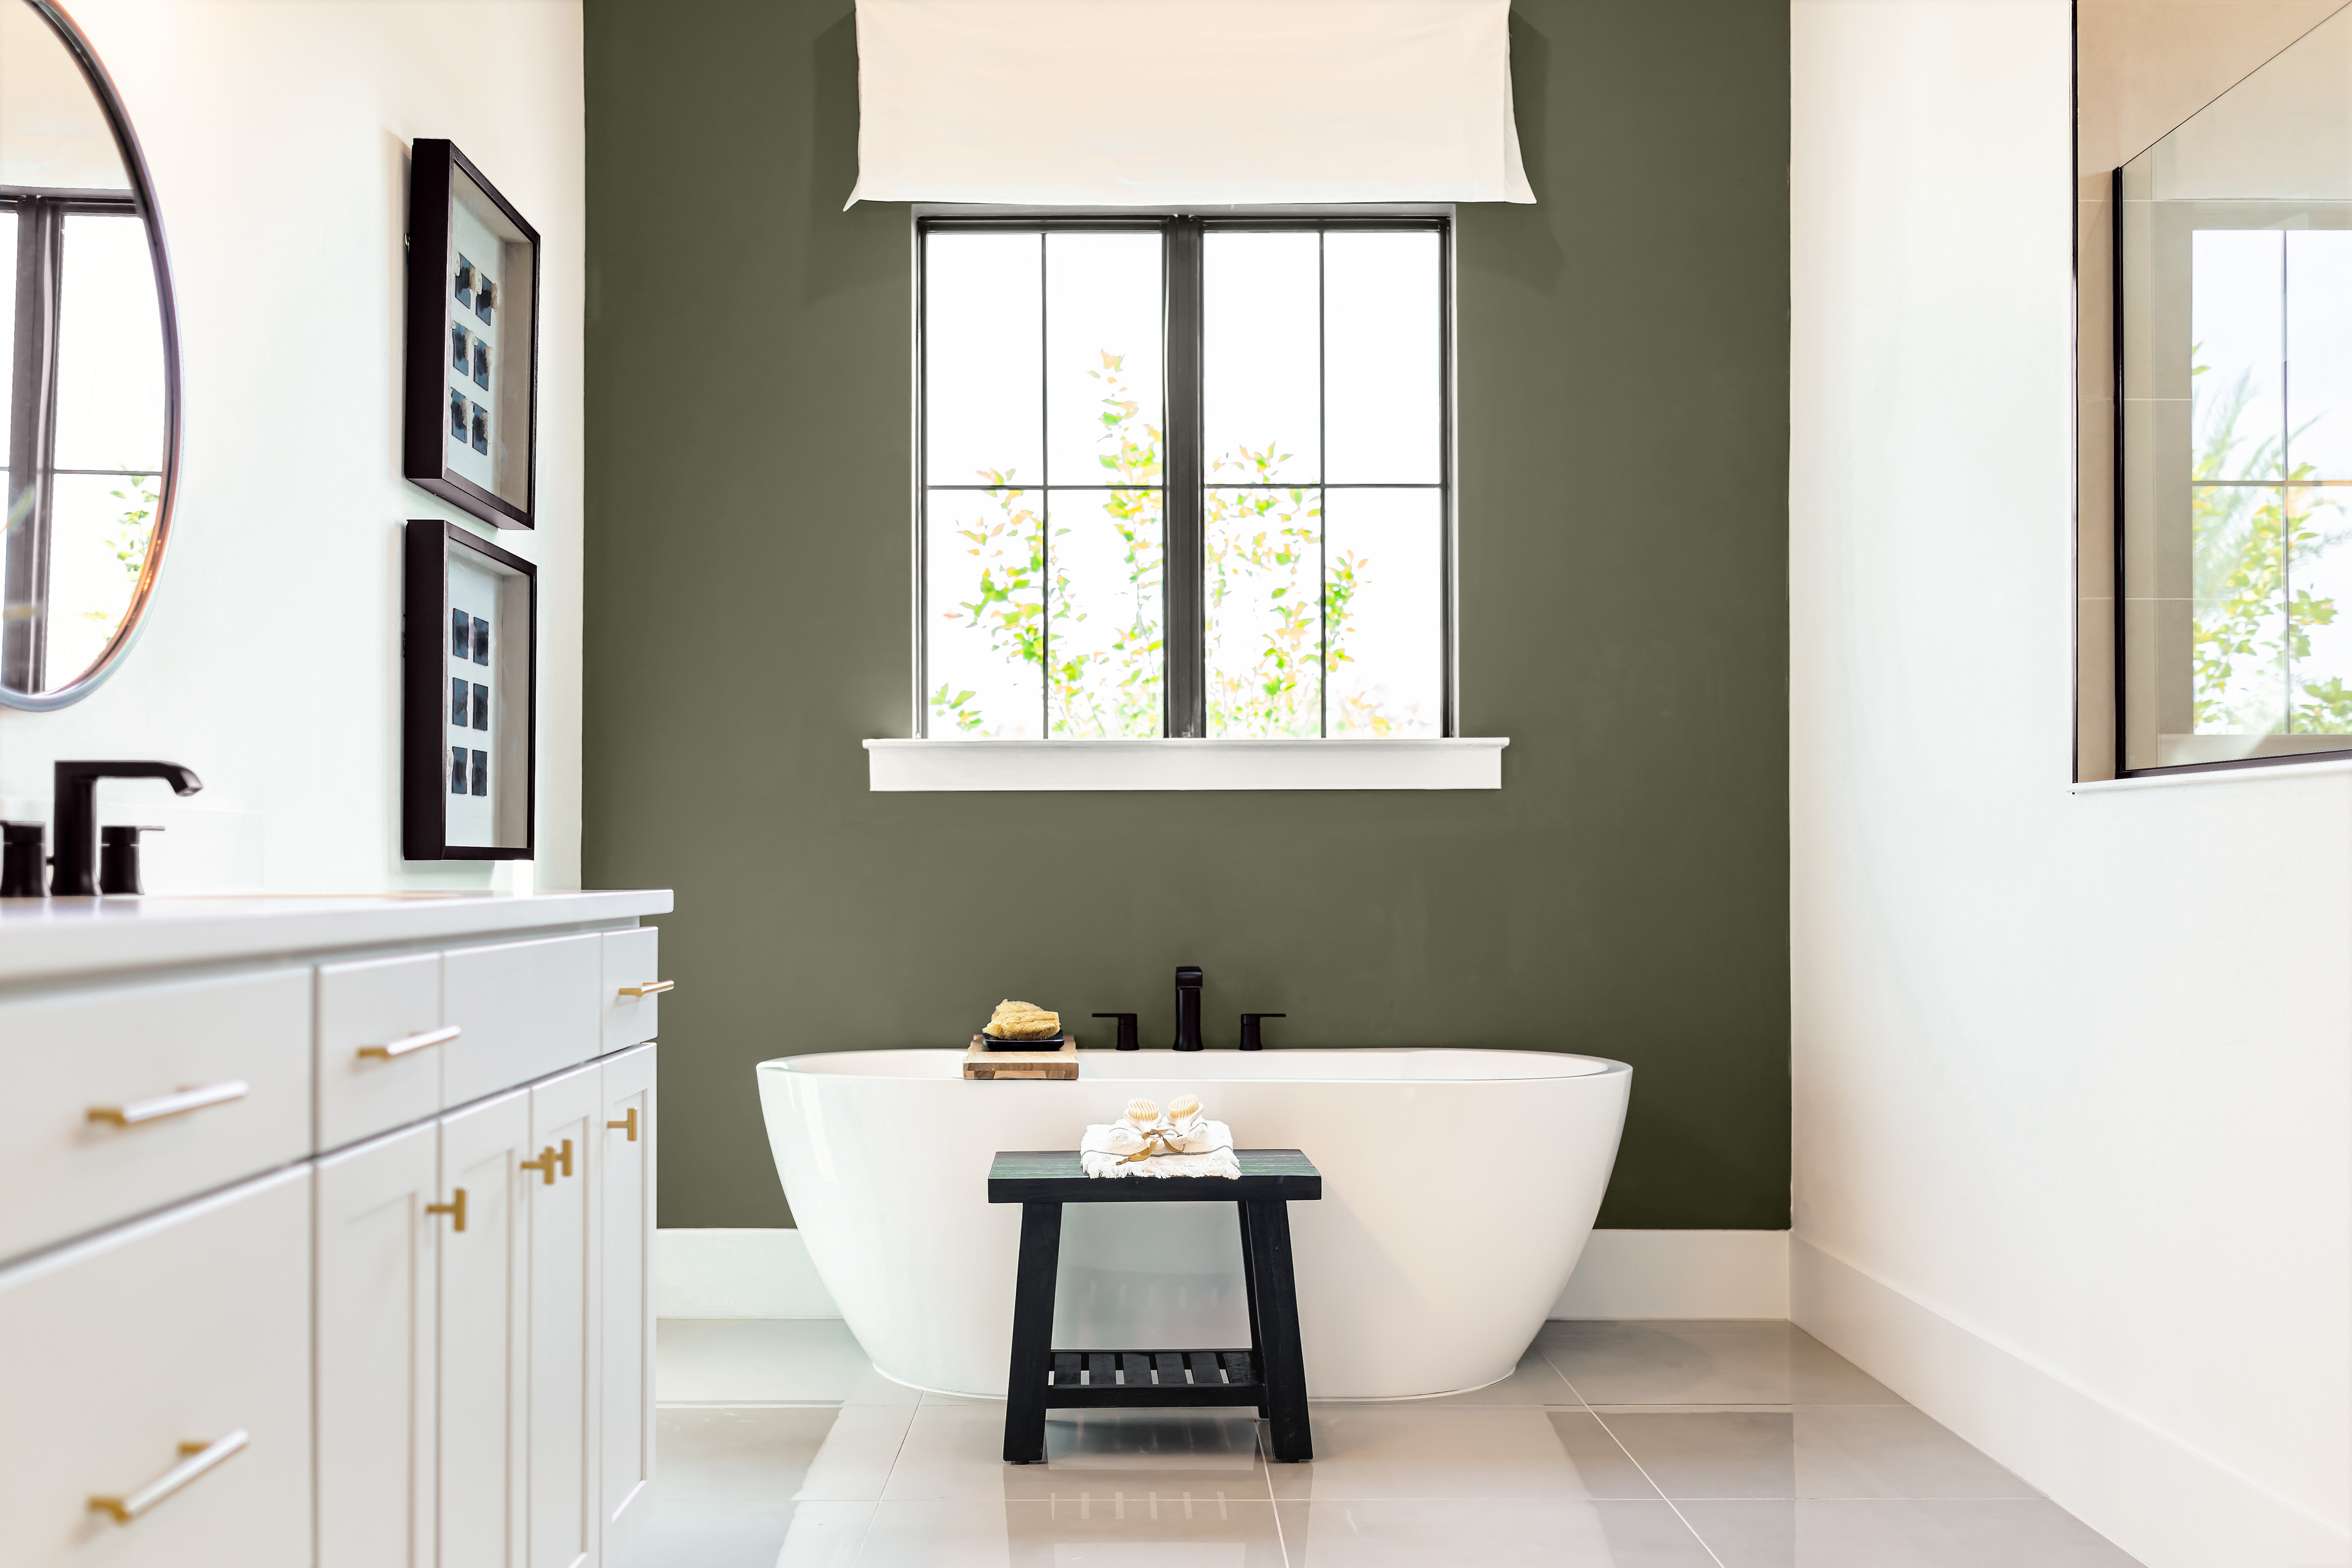 A large bathroom with two walls painted in white and an accent wall in the middle painted in a dark olive green colour, with a free standing bathtub 